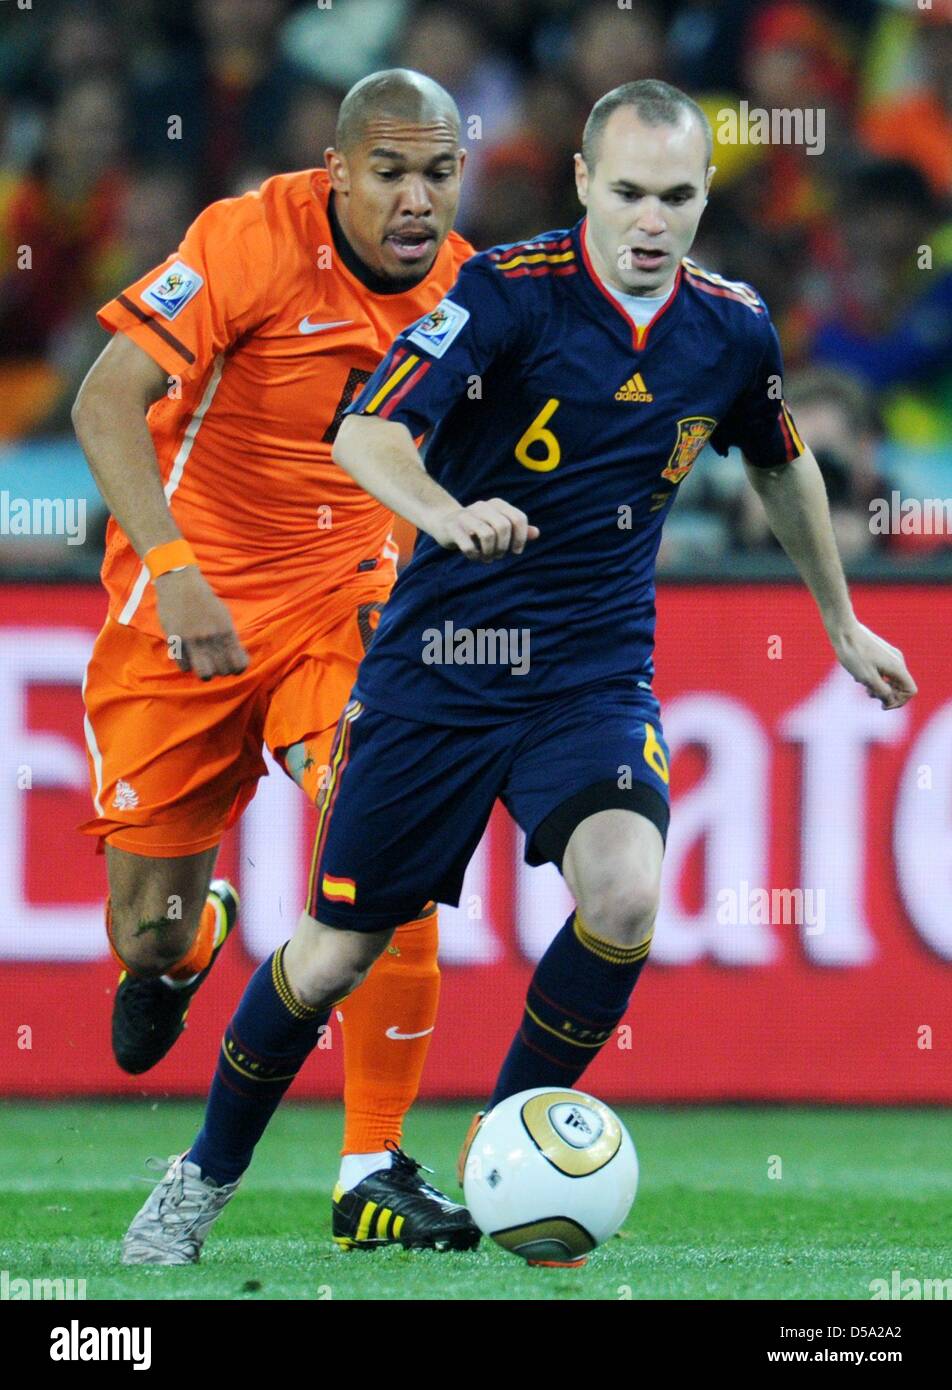 Andres Iniesta (R) of Spain vies with Nigel de Jong of the Netherlands during the 2010 FIFA World Cup final match between the Netherlands and Spain at the Soccer City Stadium in Johannesburg, South Africa 11 July 2010. Photo: Bernd Weissbrod dpa - Please refer to http://dpaq.de/FIFA-WM2010-TC  +++(c) dpa - Bildfunk+++ Stock Photo